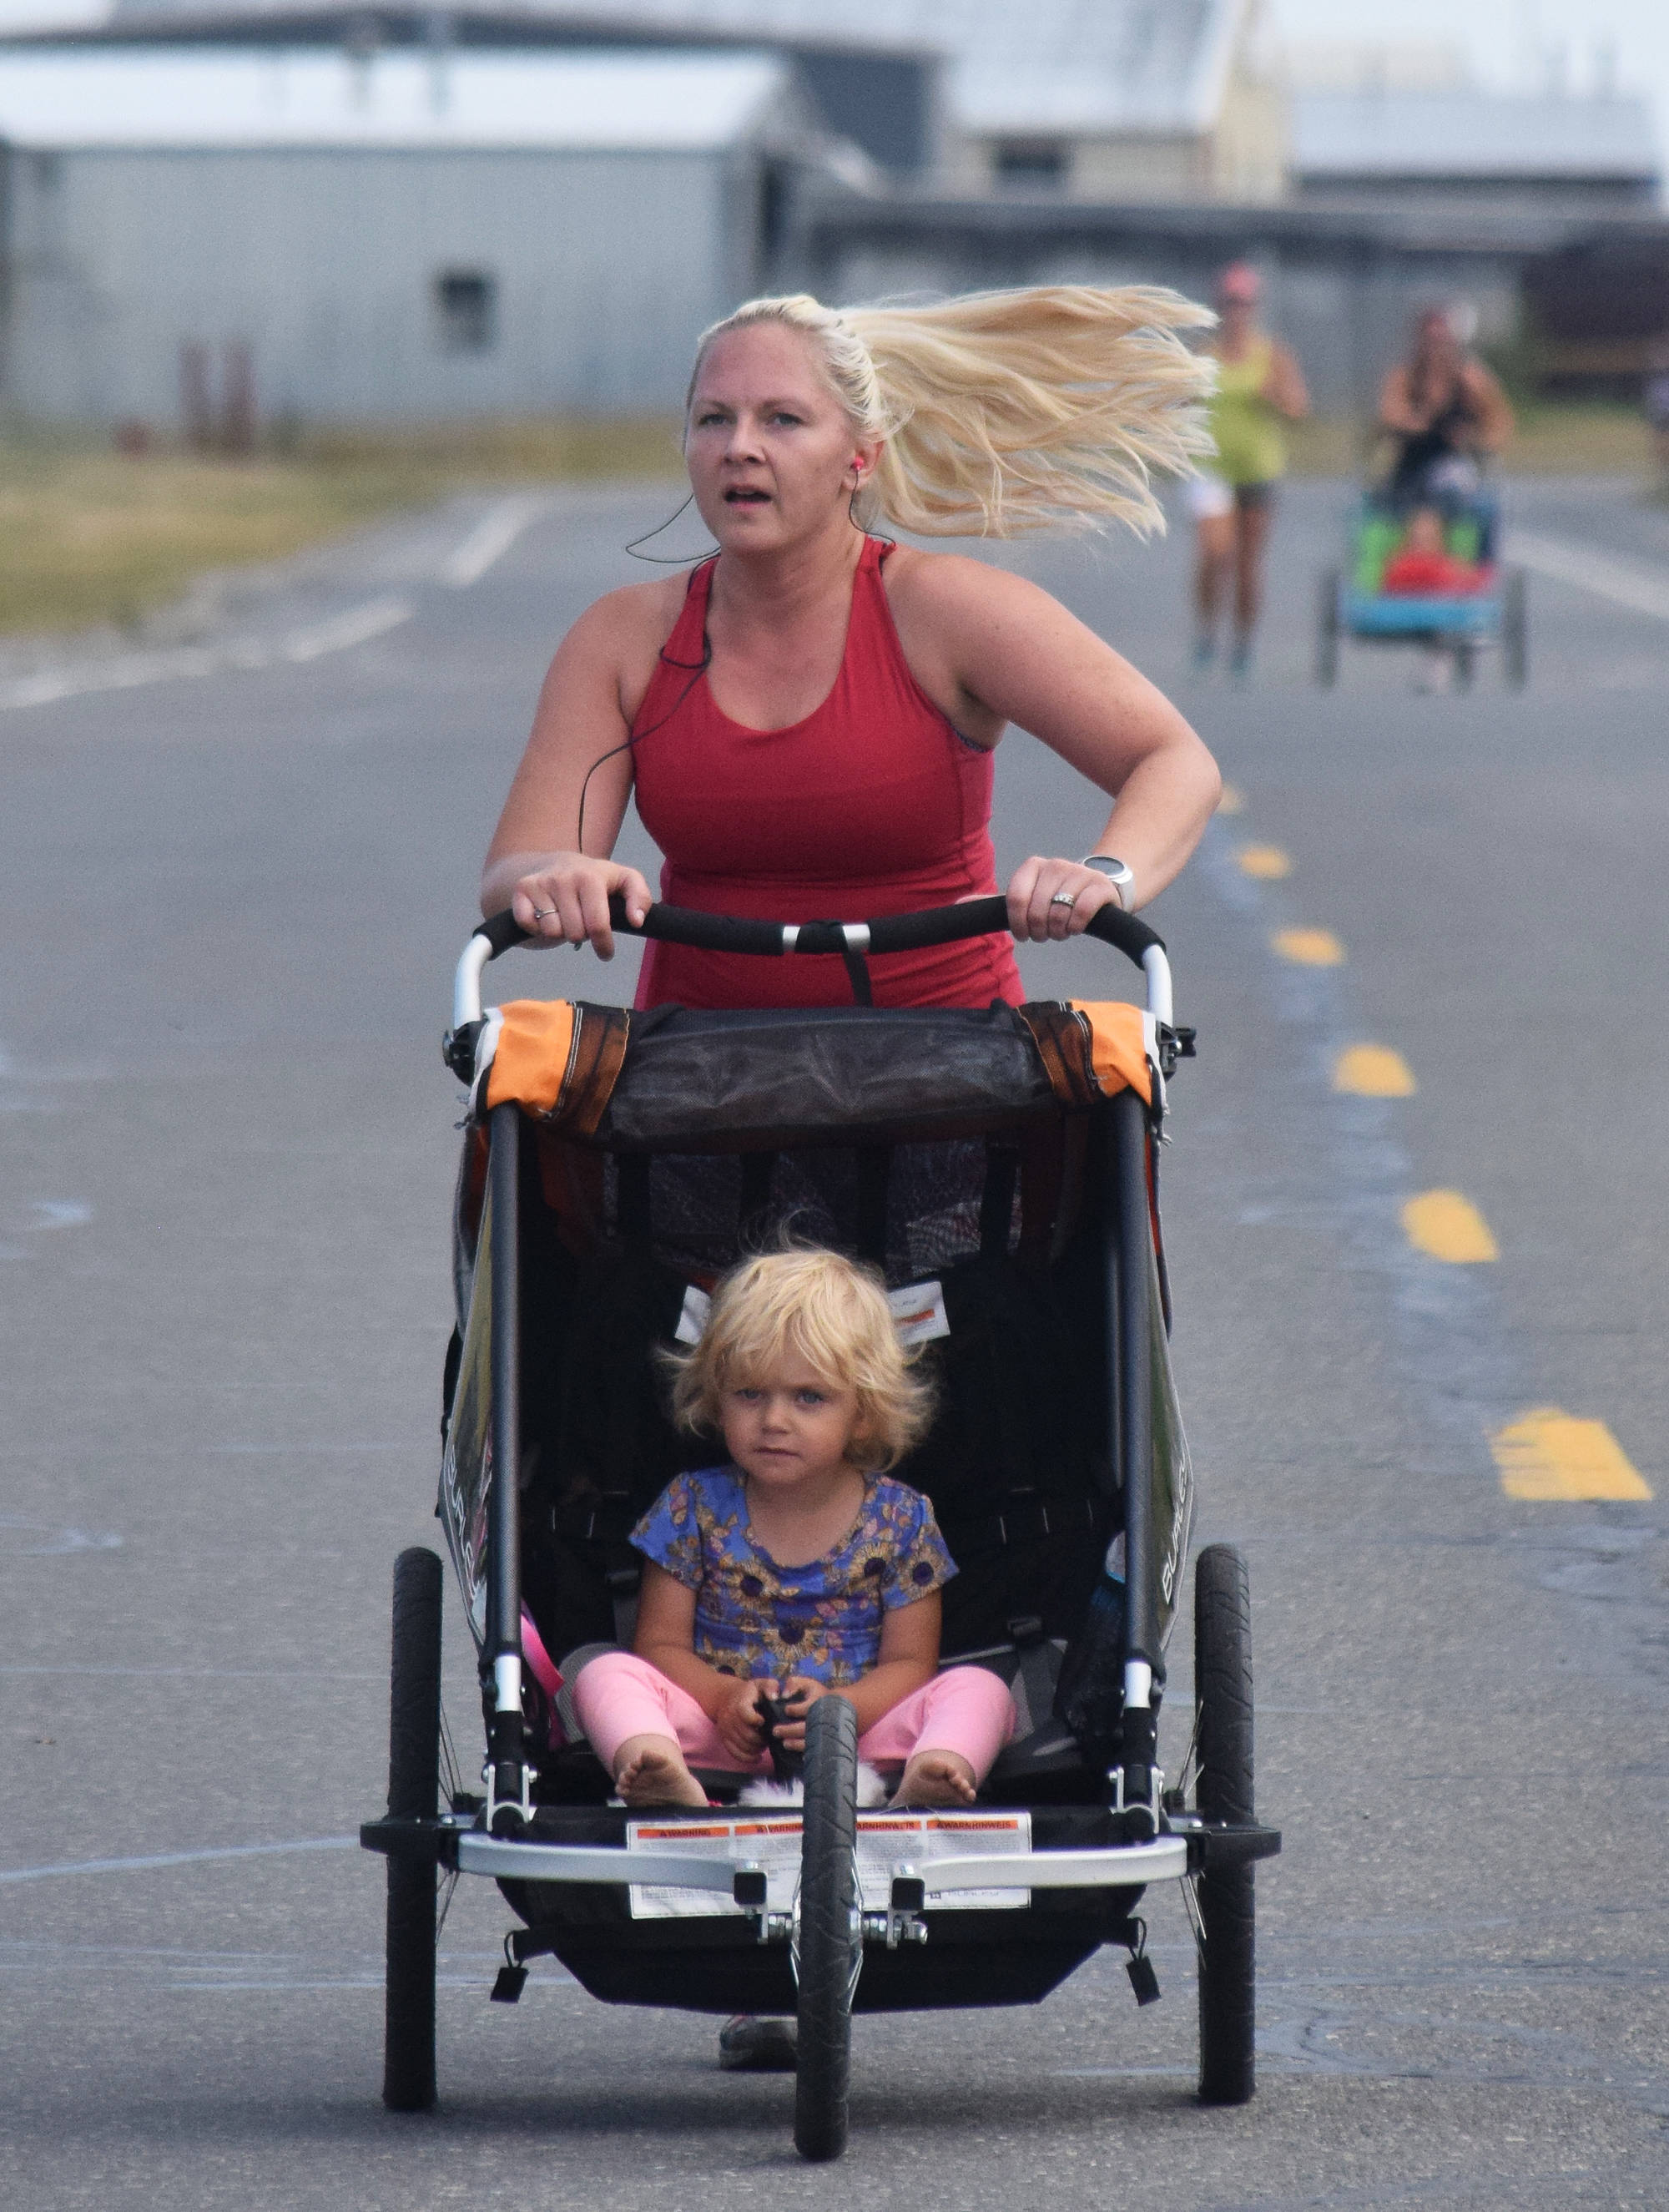 A 5K runner pushing a stroller approaches the finish line Saturday, Aug. 10, 2019, at the 32nd annual Run for Women in Kenai, Alaska. (Photo by Joey Klecka/Peninsula Clarion)